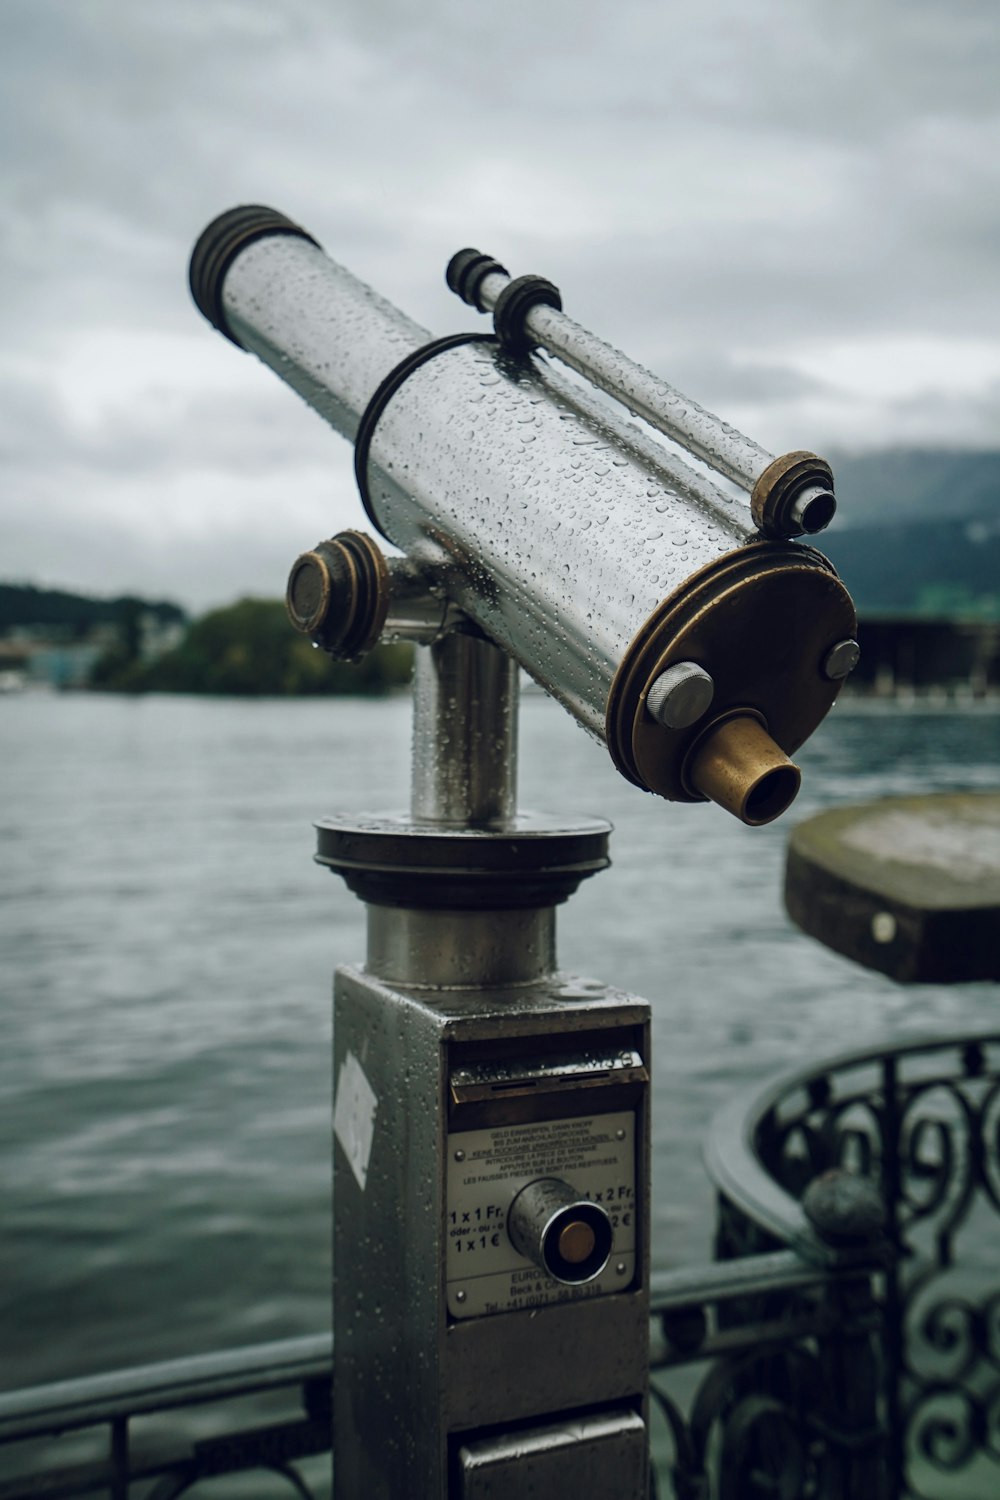 public telescope beside railing facing the body of water during day